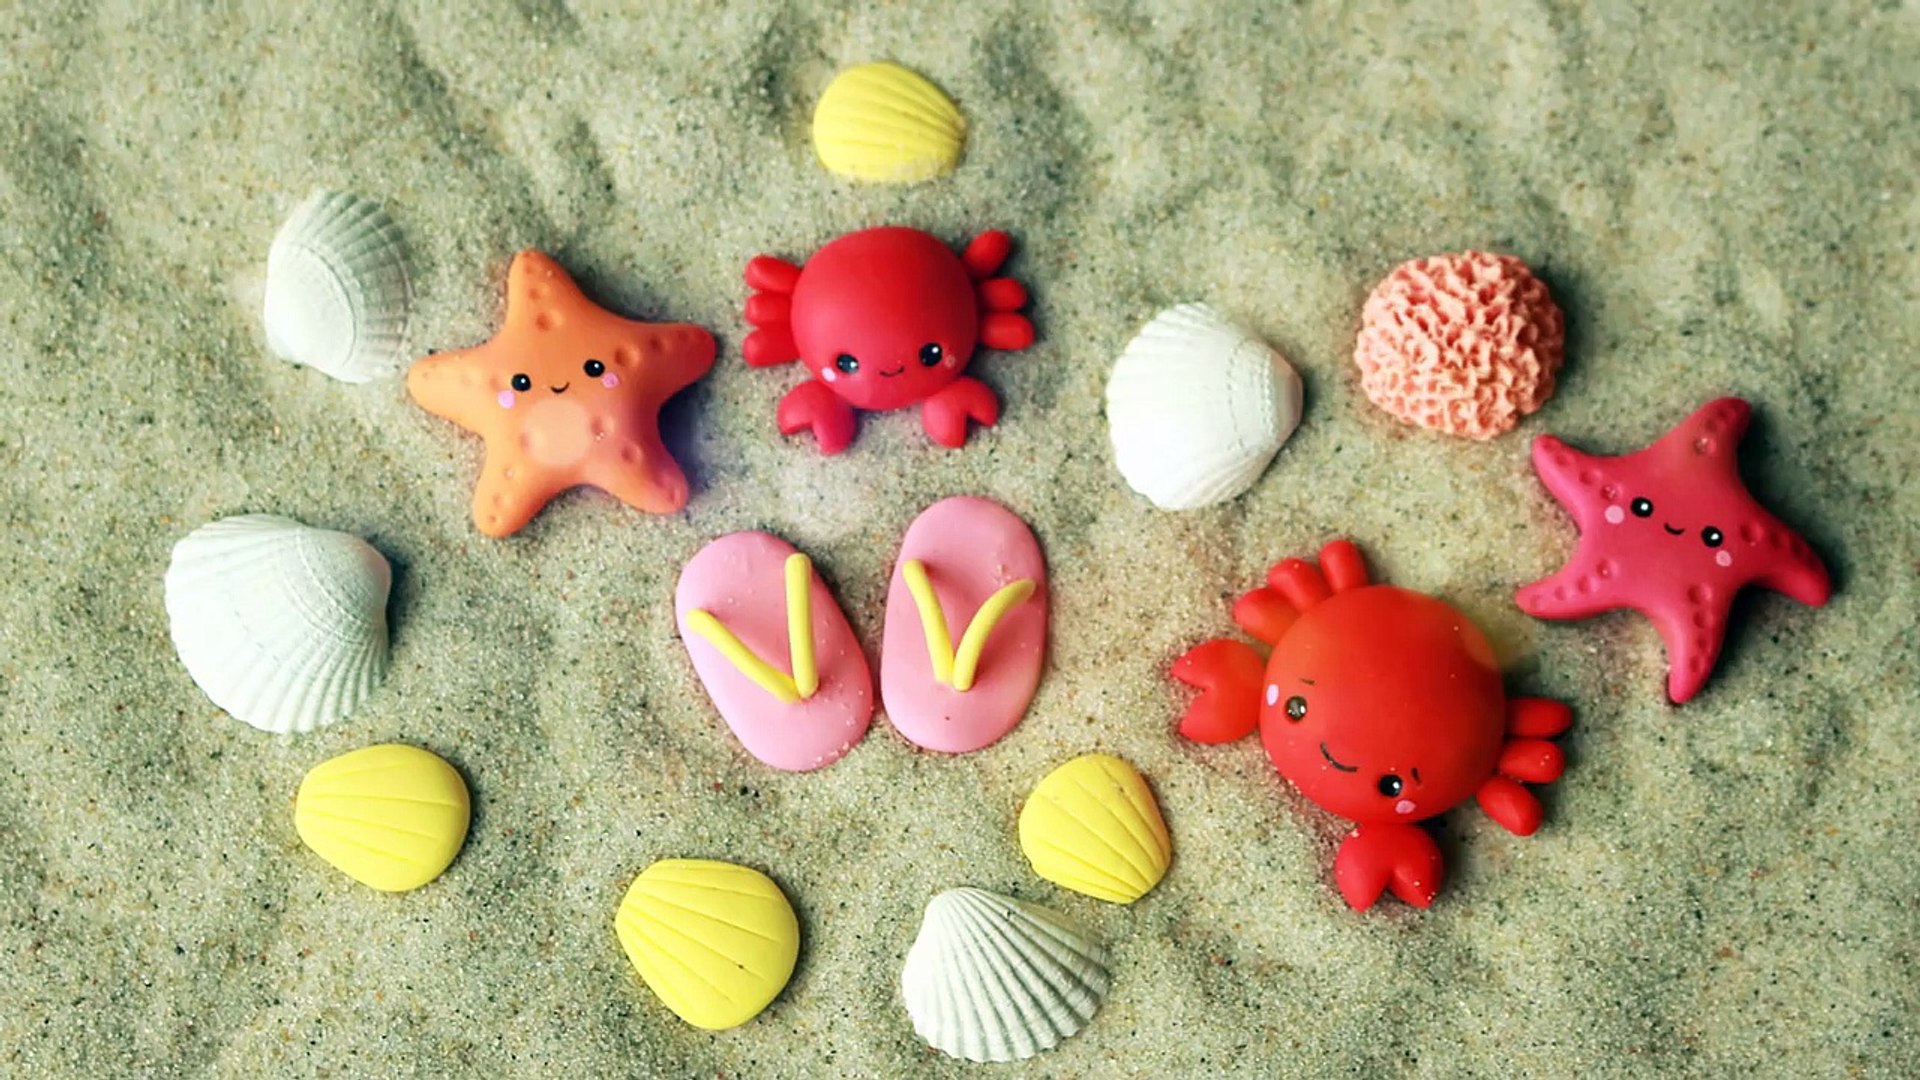 I made these cute charms out of polymer clay! : r/polymerclay